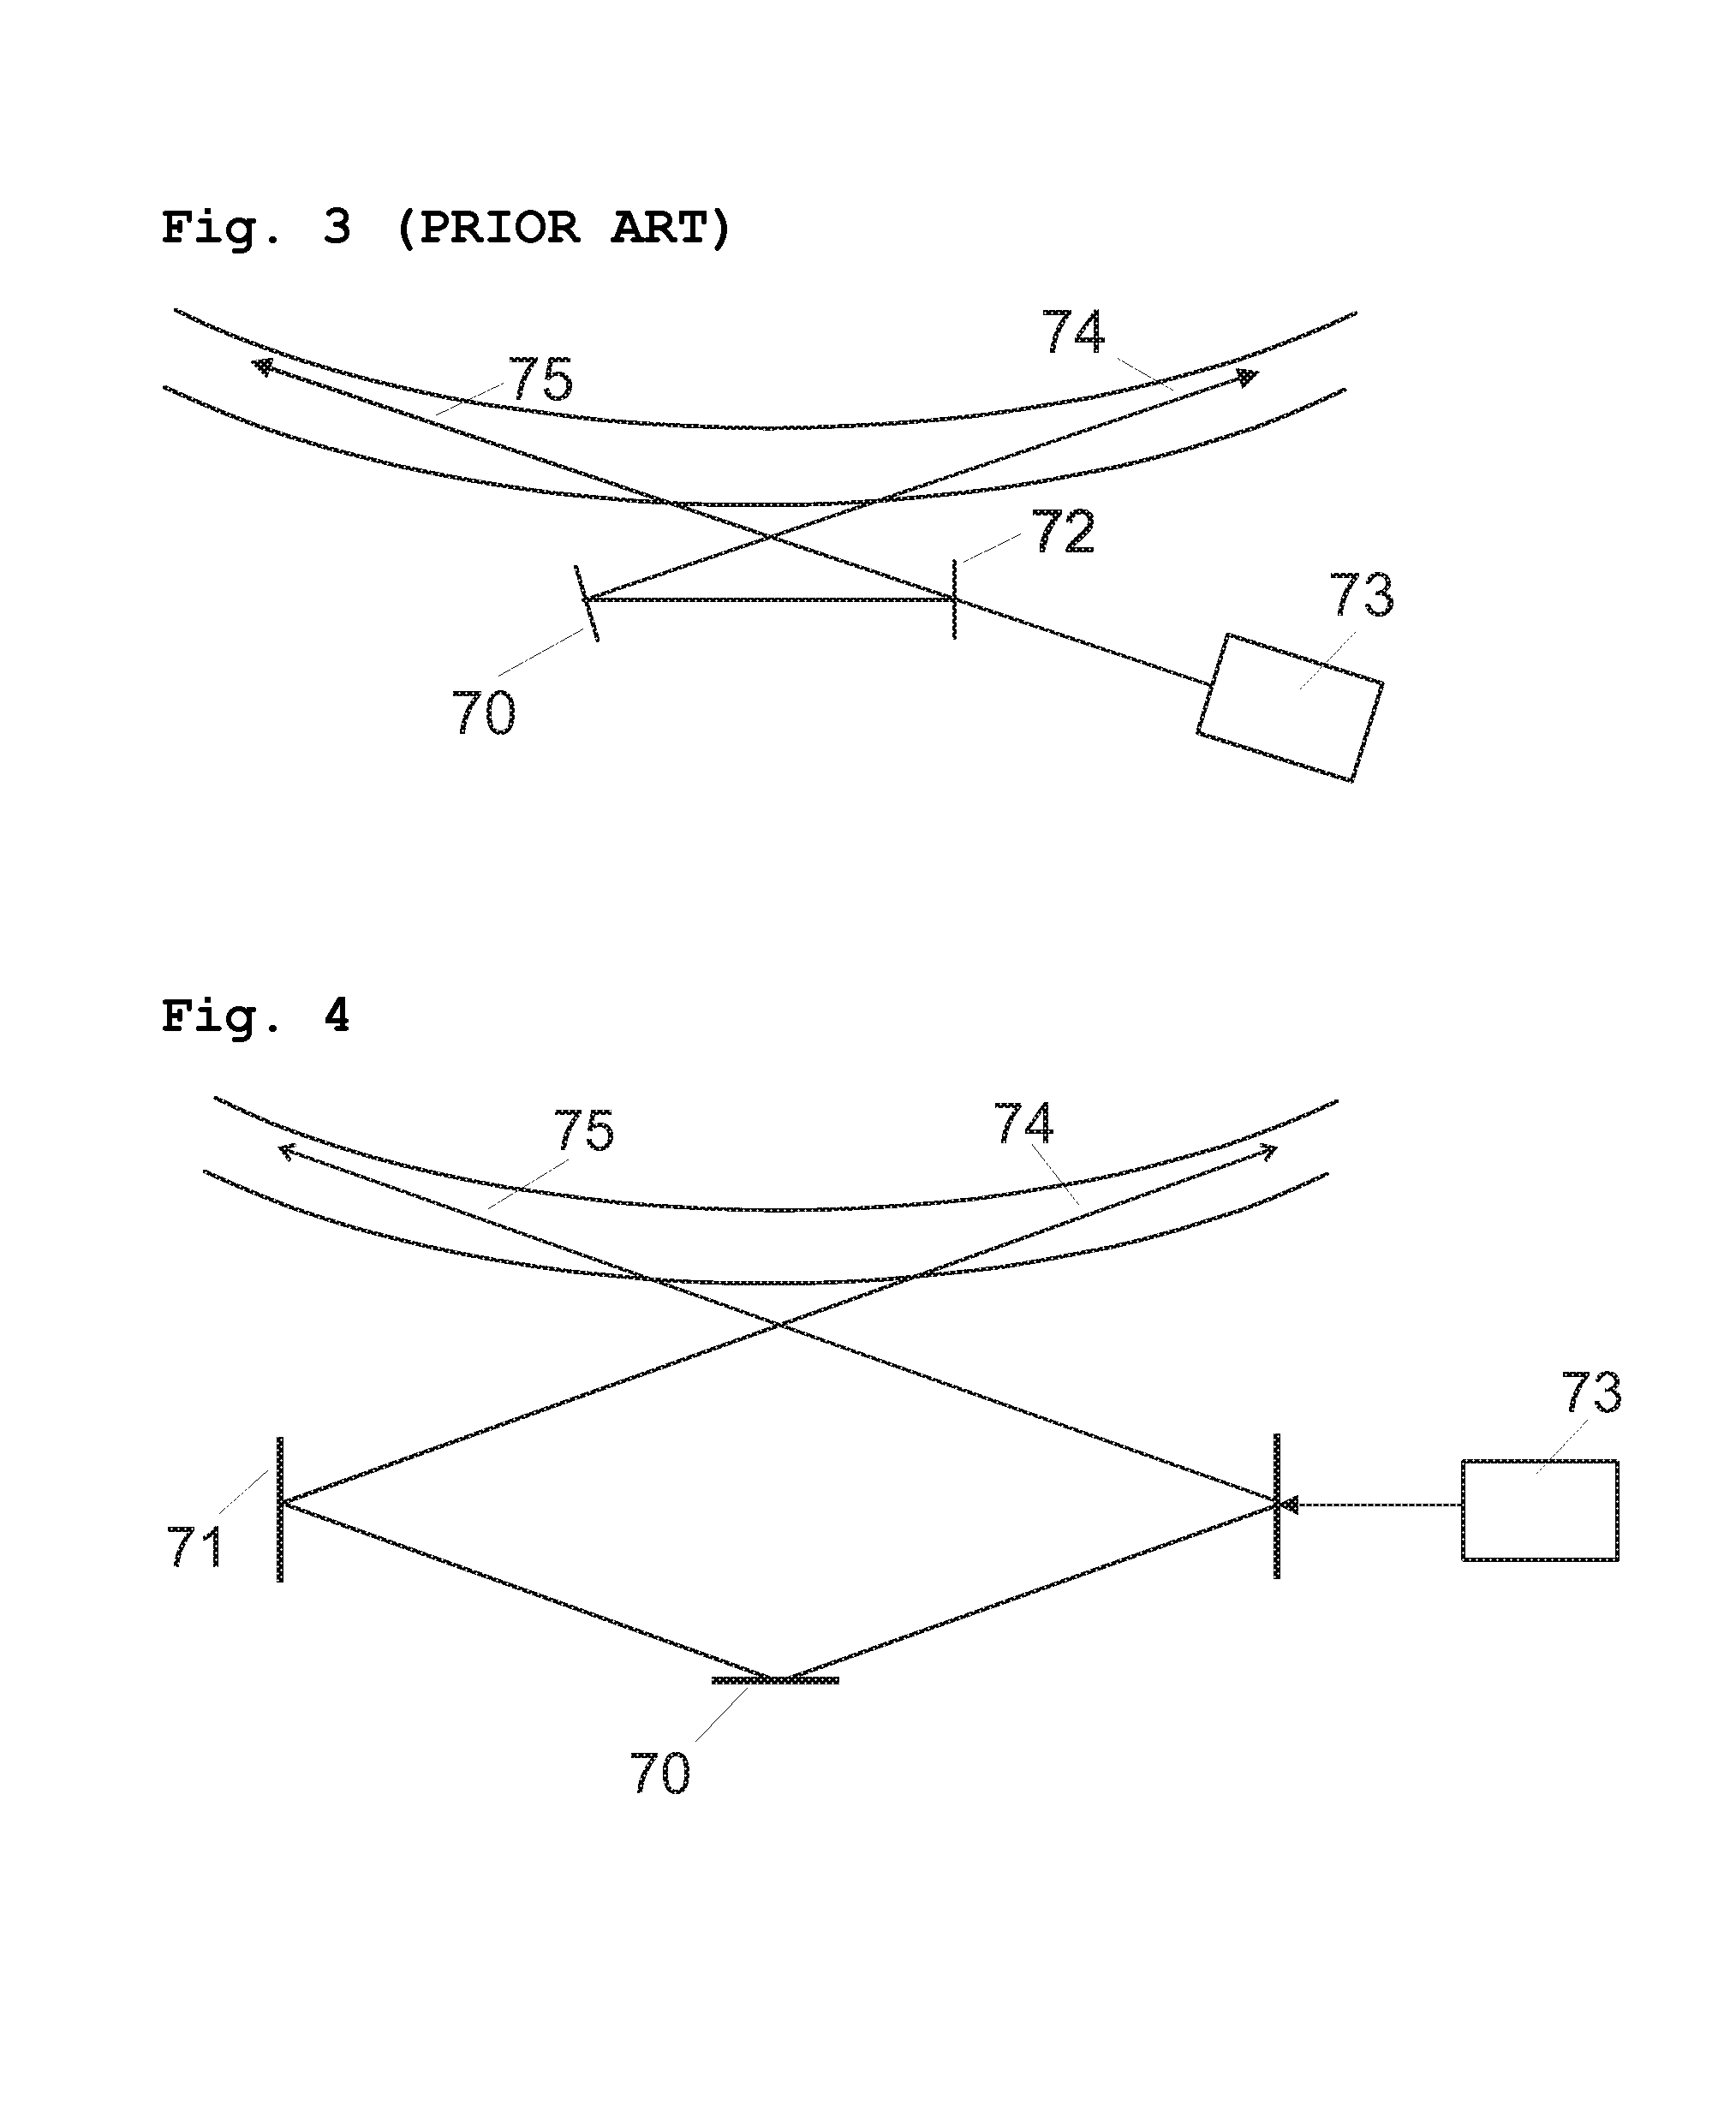 Optical rotating data transmission device with an unobstructed diameter